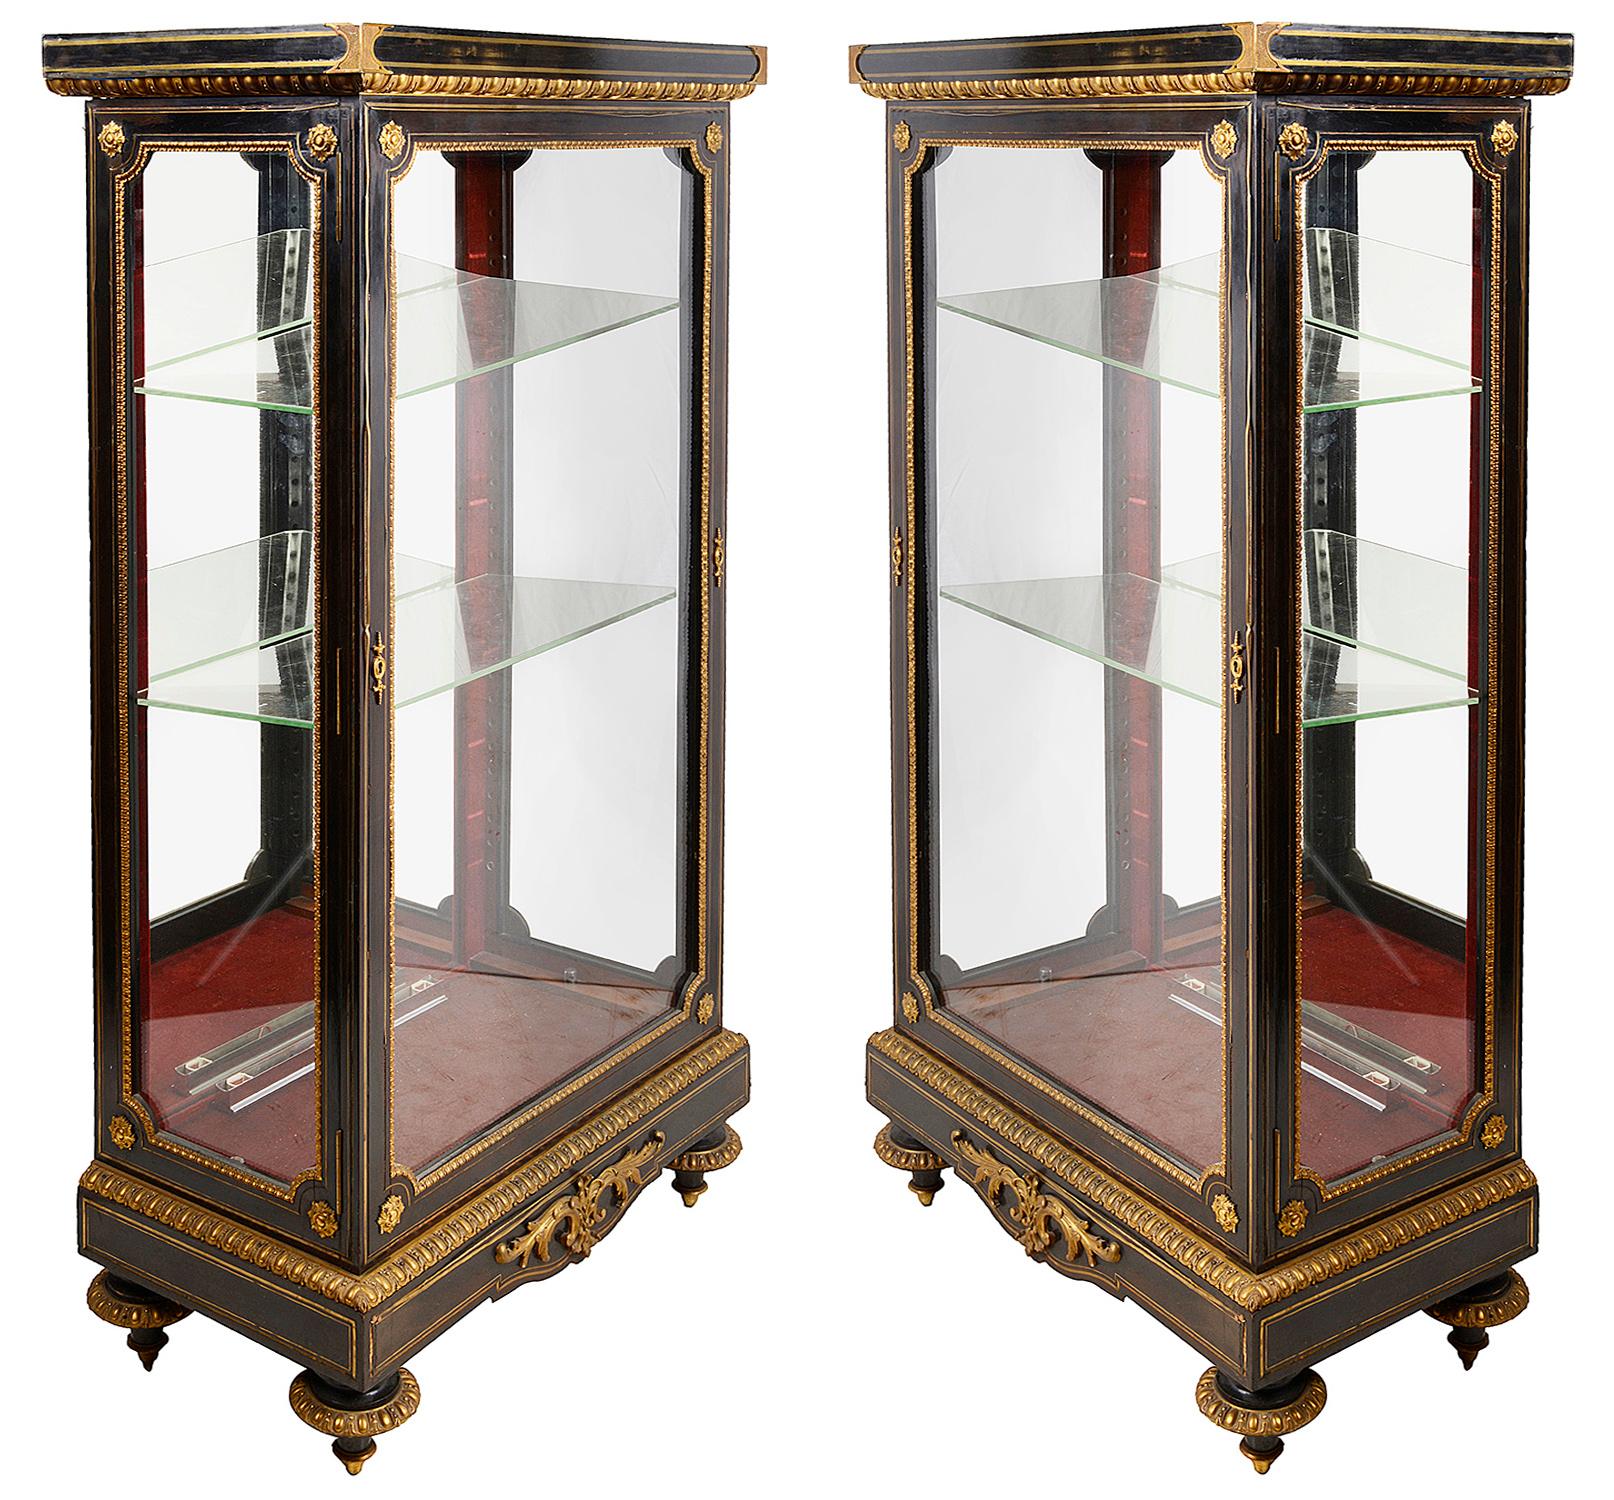 A good quality pair of 19th century French ebonized display cabinets, having classical gilded ormolu mounts. Adjustable glass shelves and mirror backs within, raised on plinth bases and turned ormolu mounted feet.